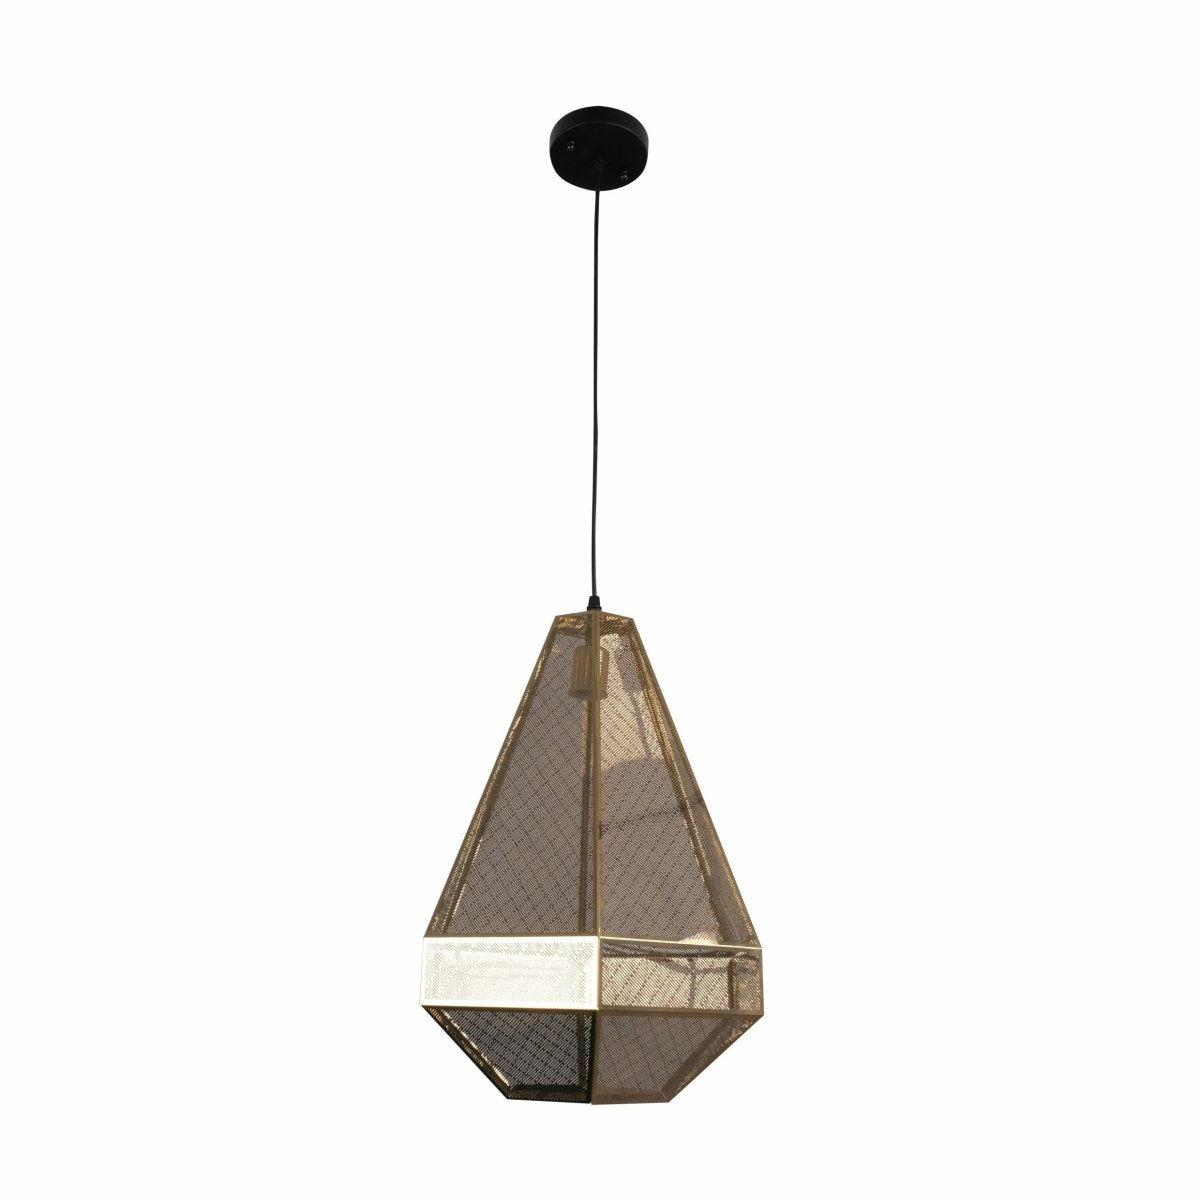 Main image of Golden Metal Polyhedral Pendant Light L with E27 Fitting | TEKLED 156-19542